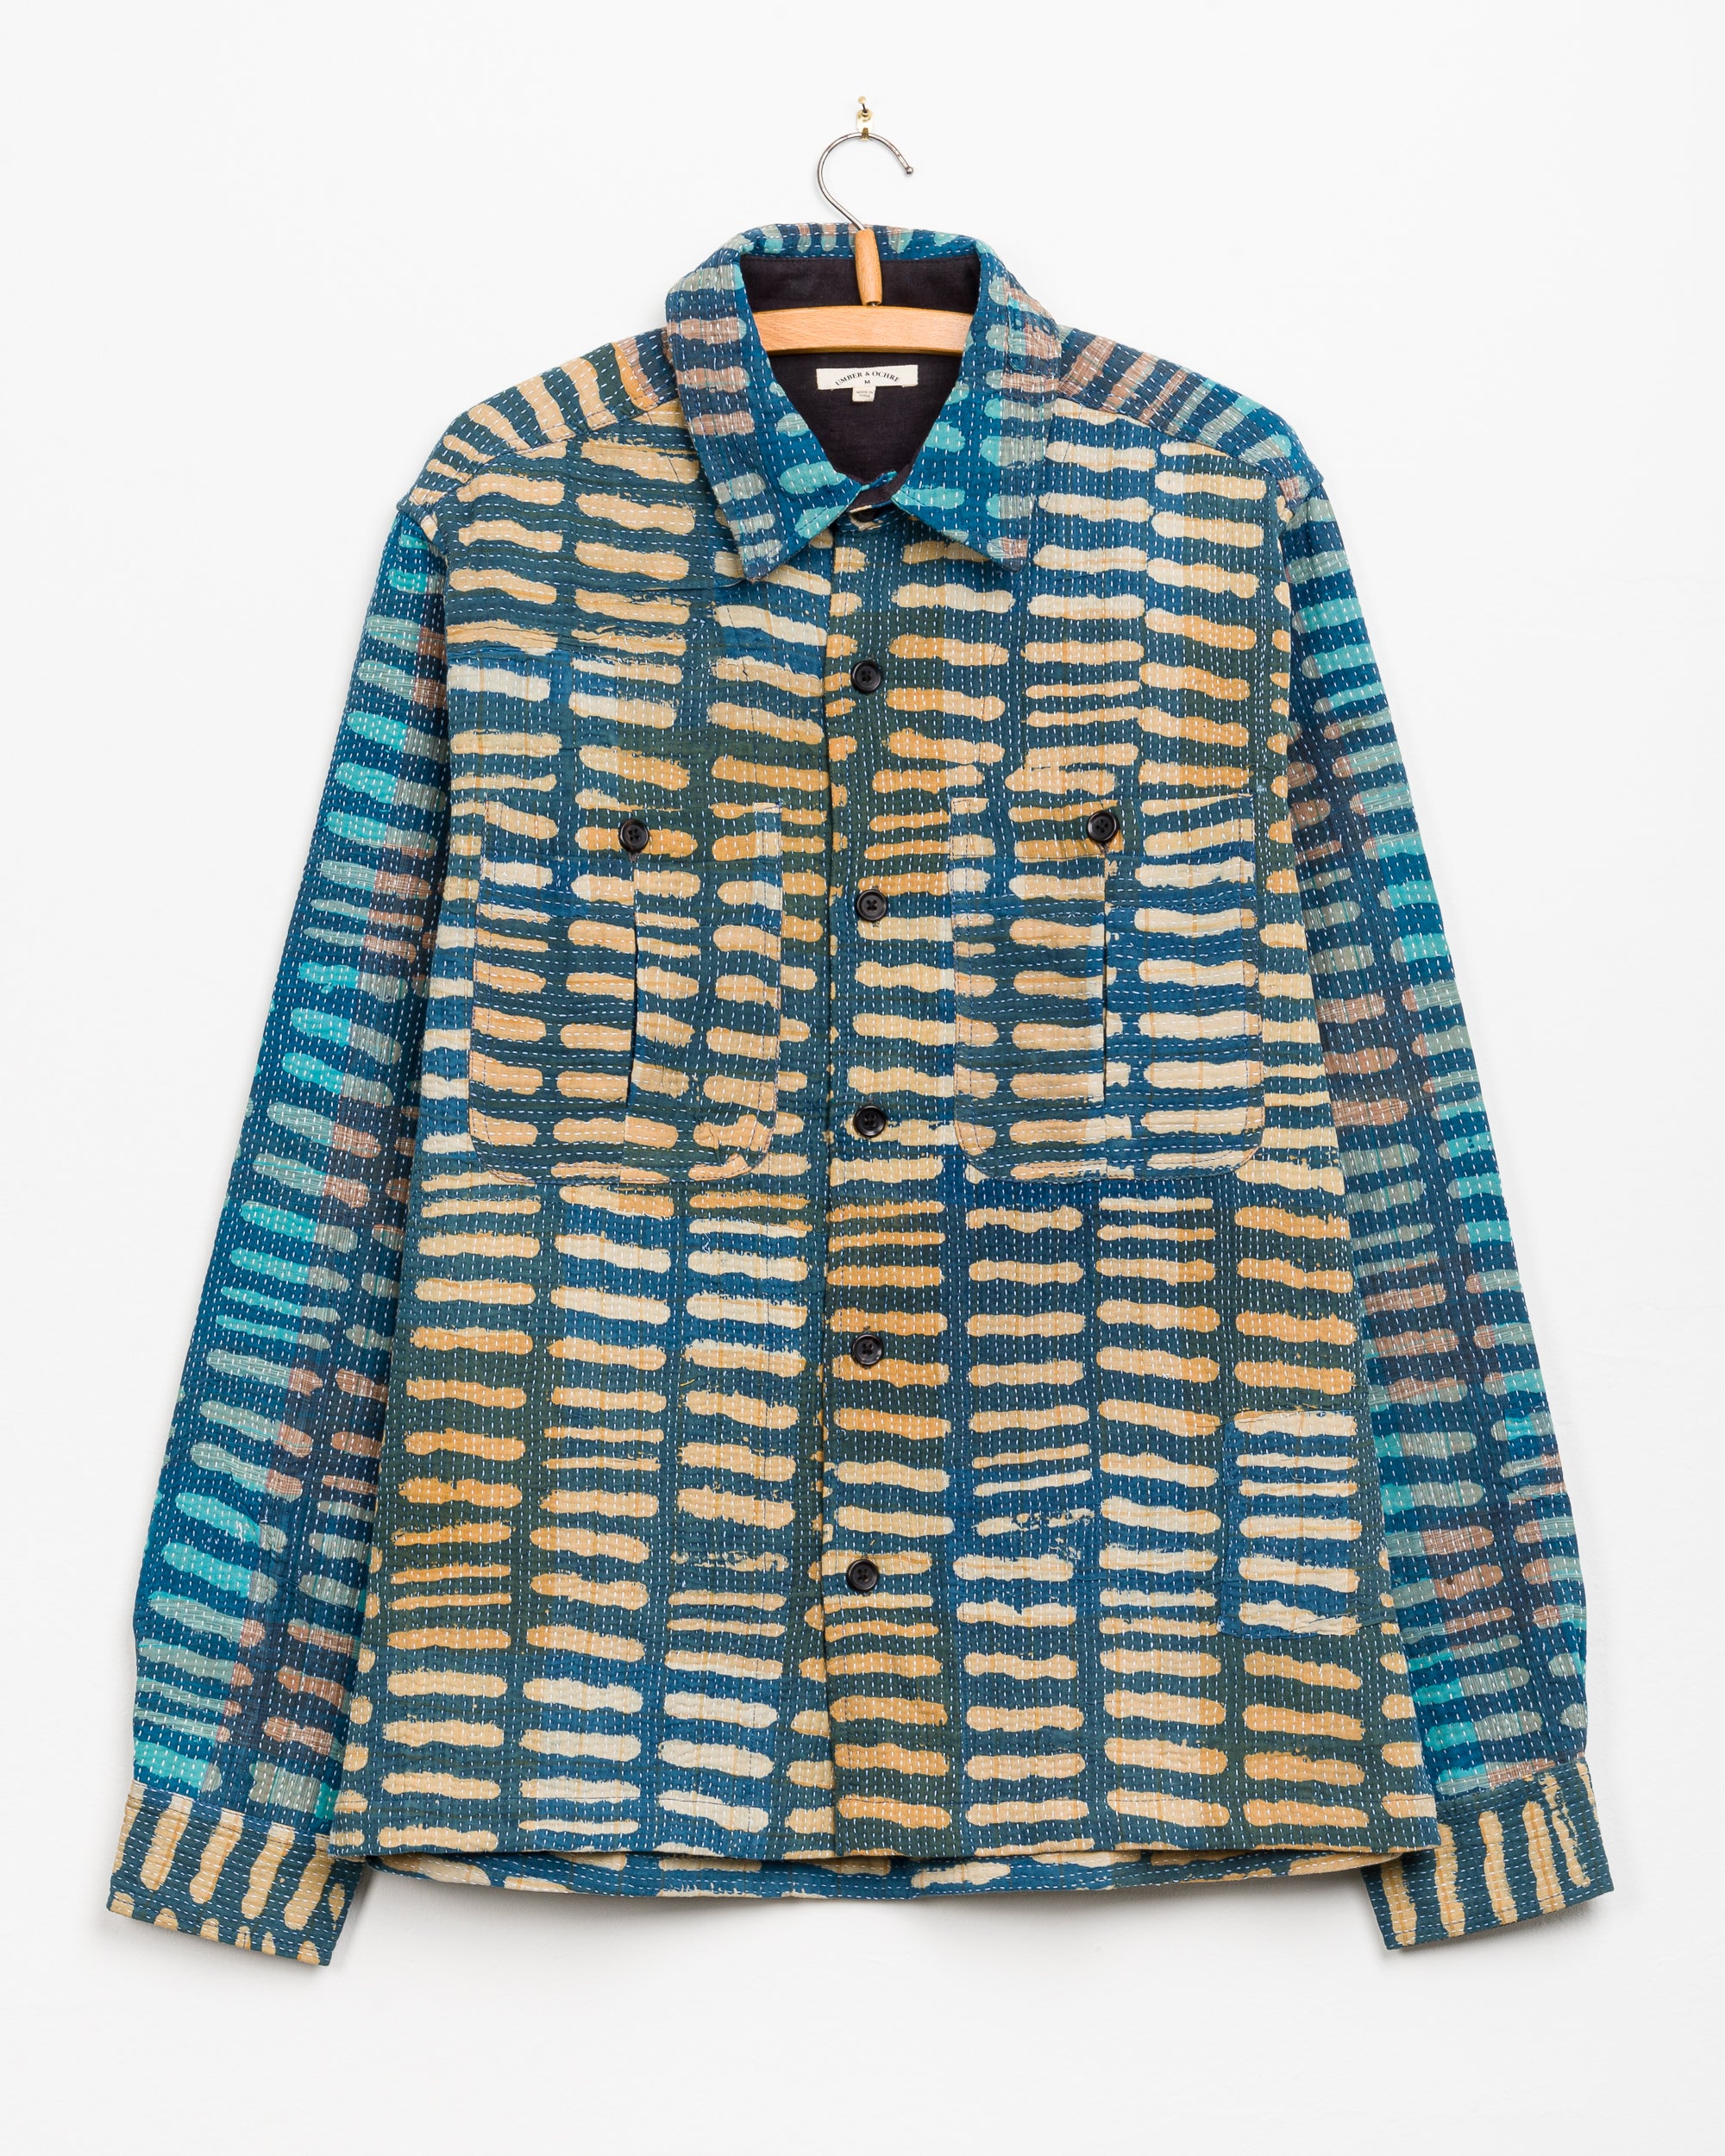 Vivek Overshirt in Quilted Kantha - M